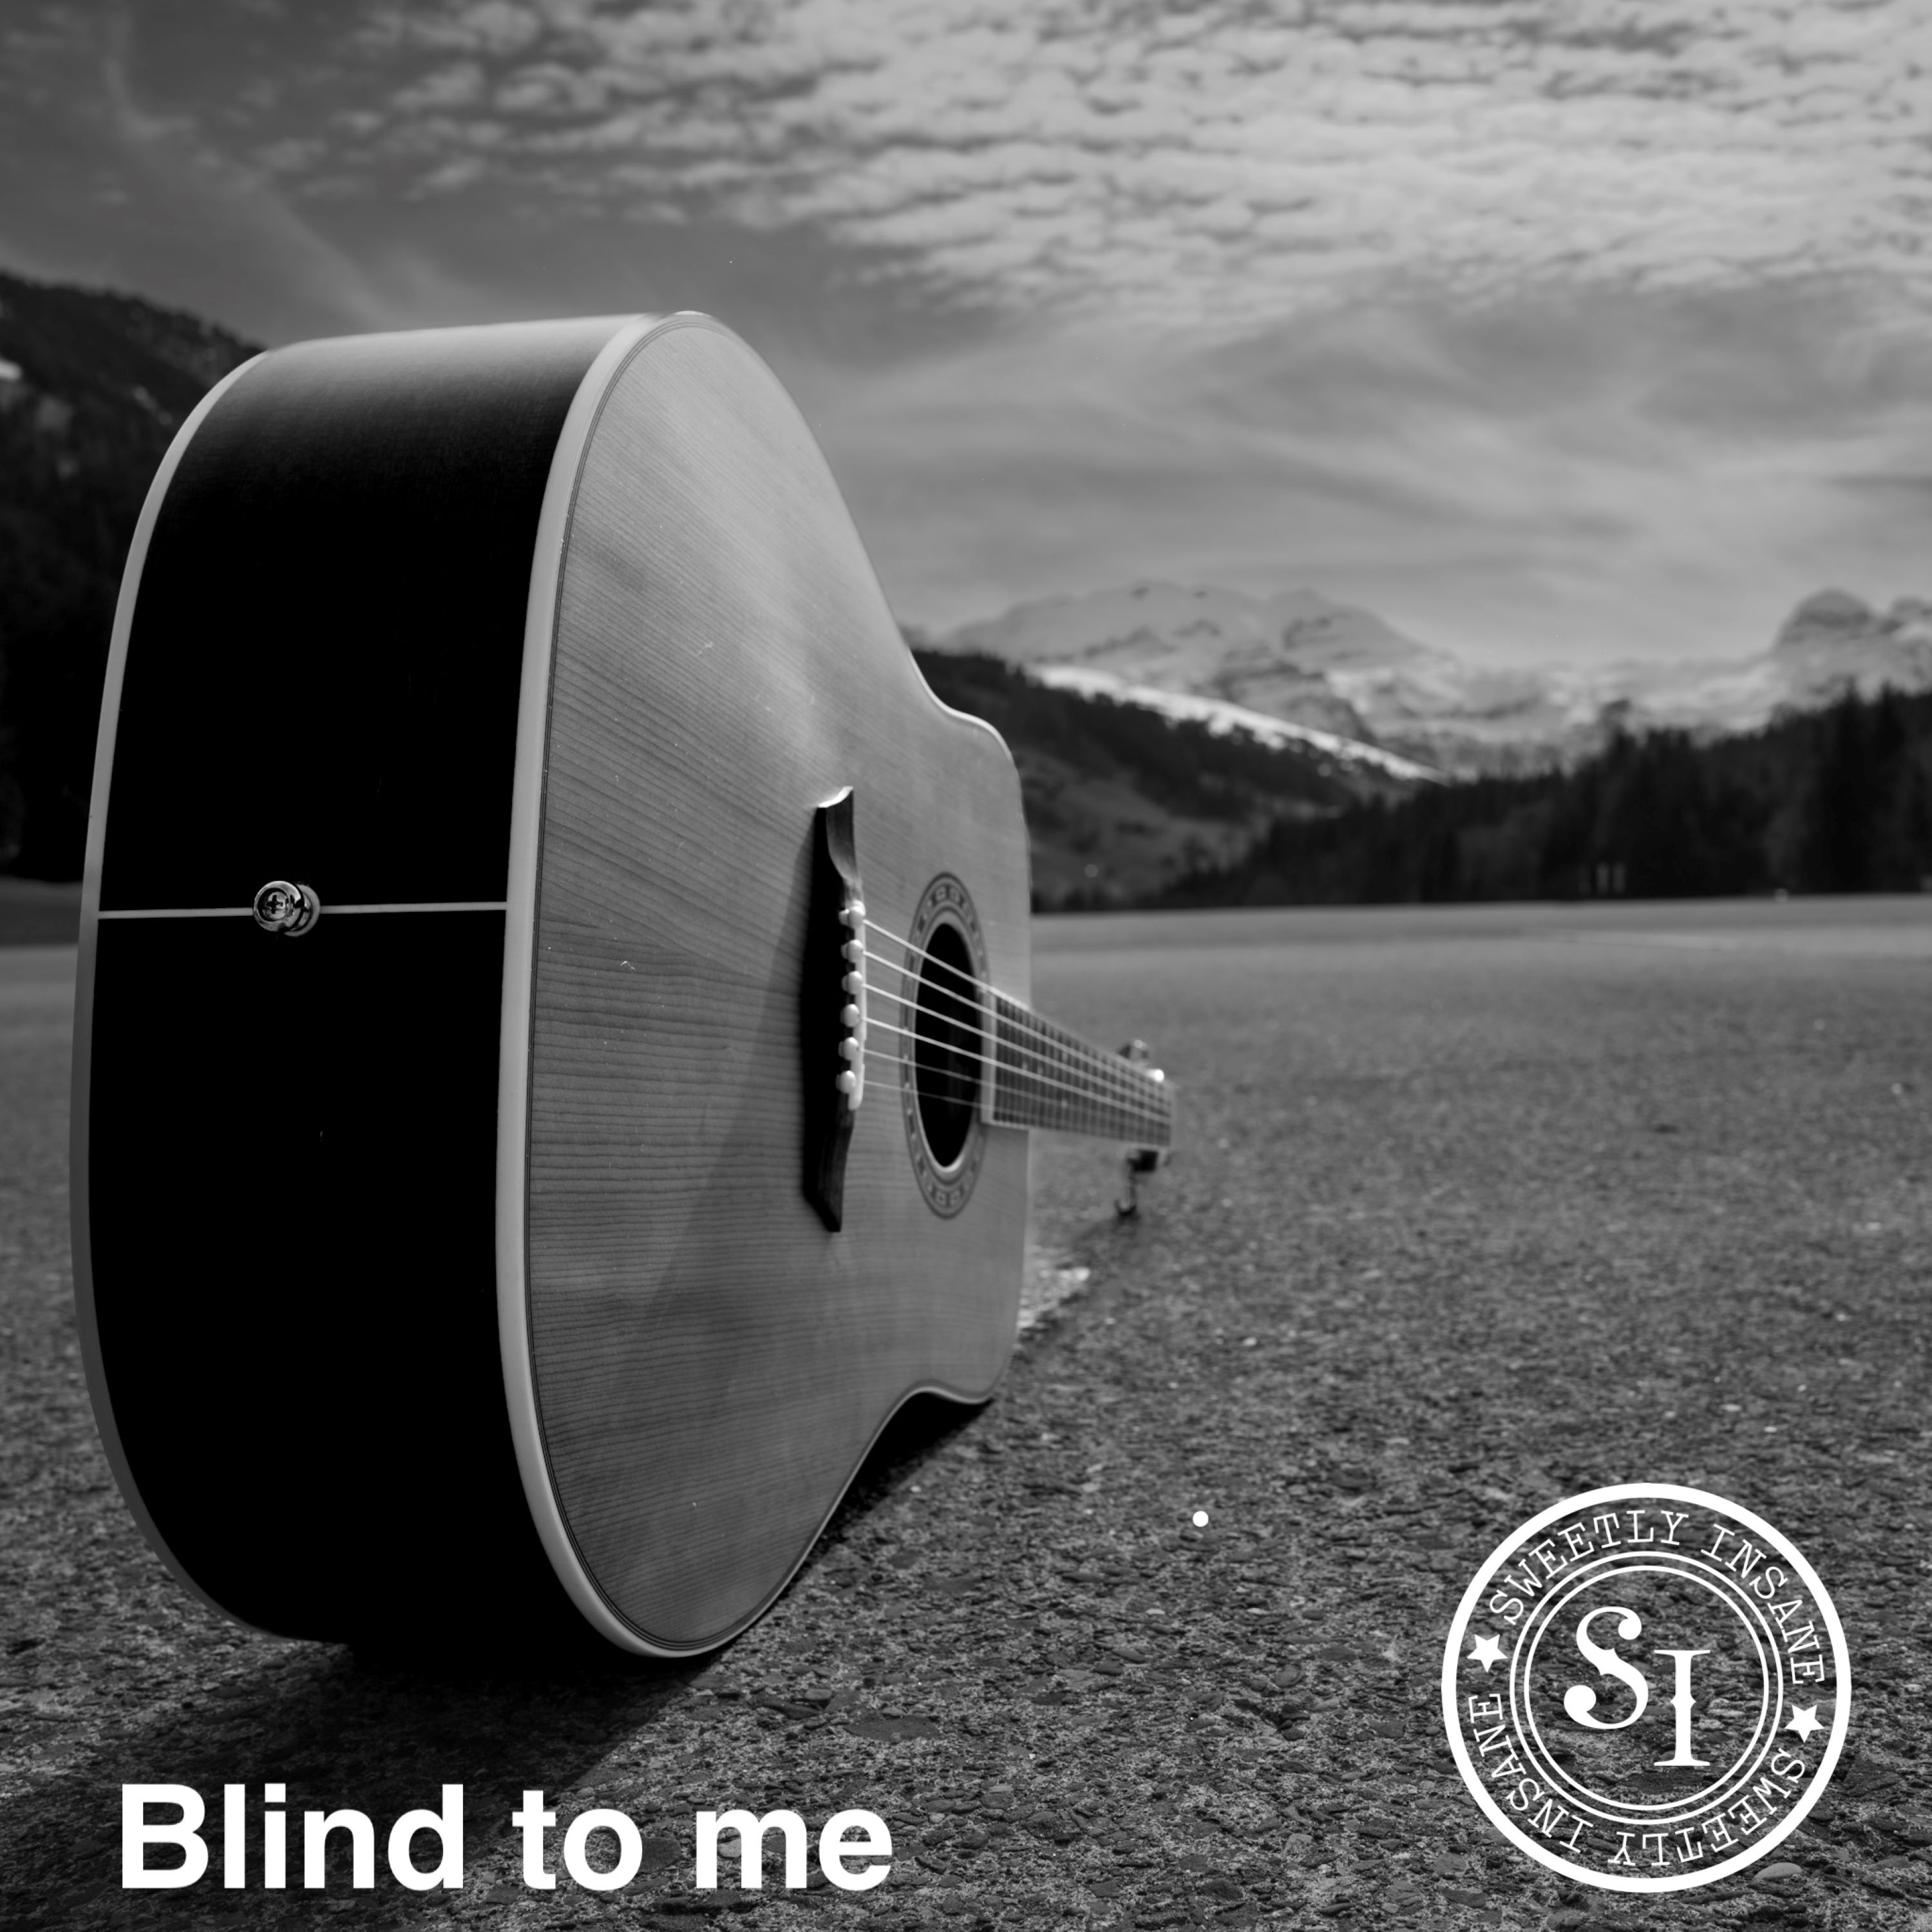 Our new song "Blind to me" is out now!